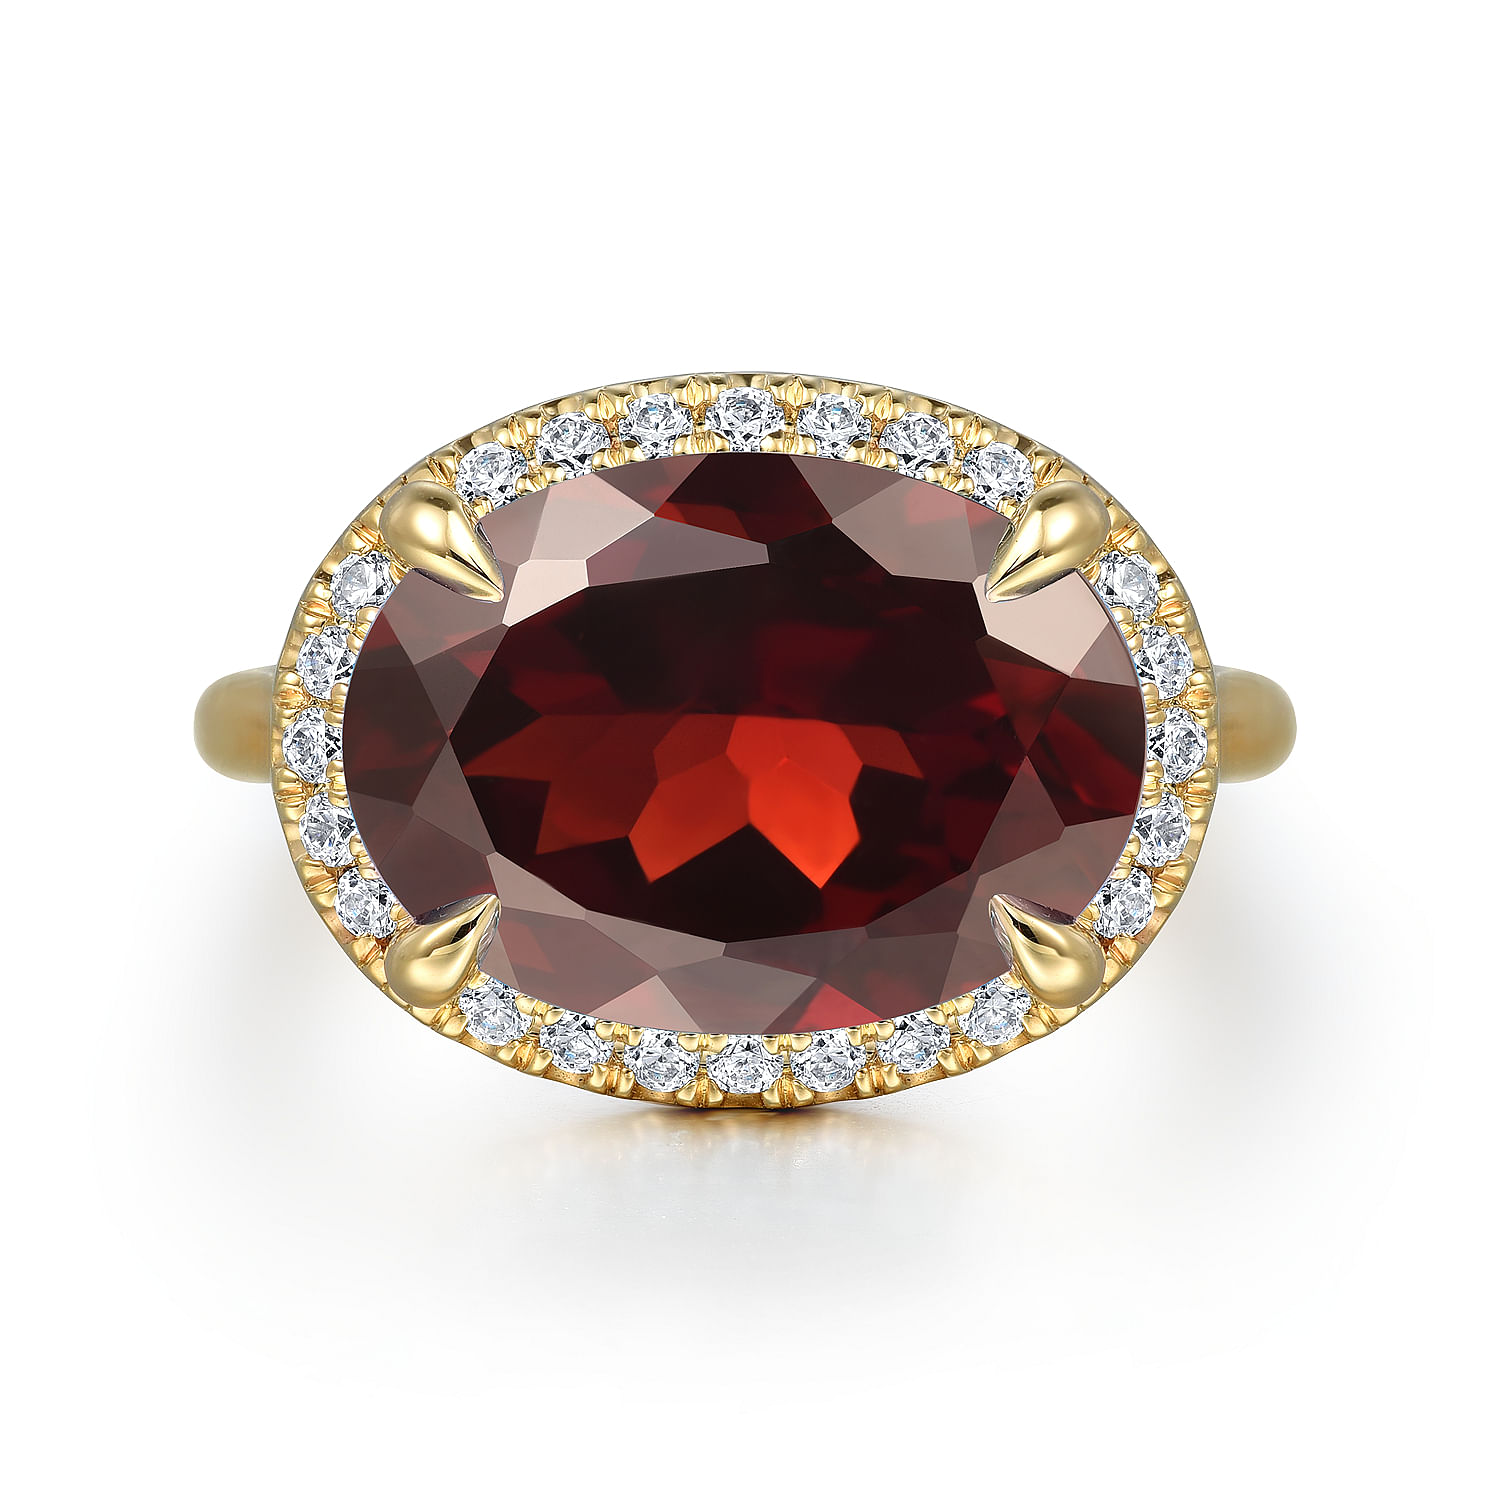 14K Yellow Gold Diamond and Oval Shape Garnet Ladies Ring With Flower Pattern Gallery